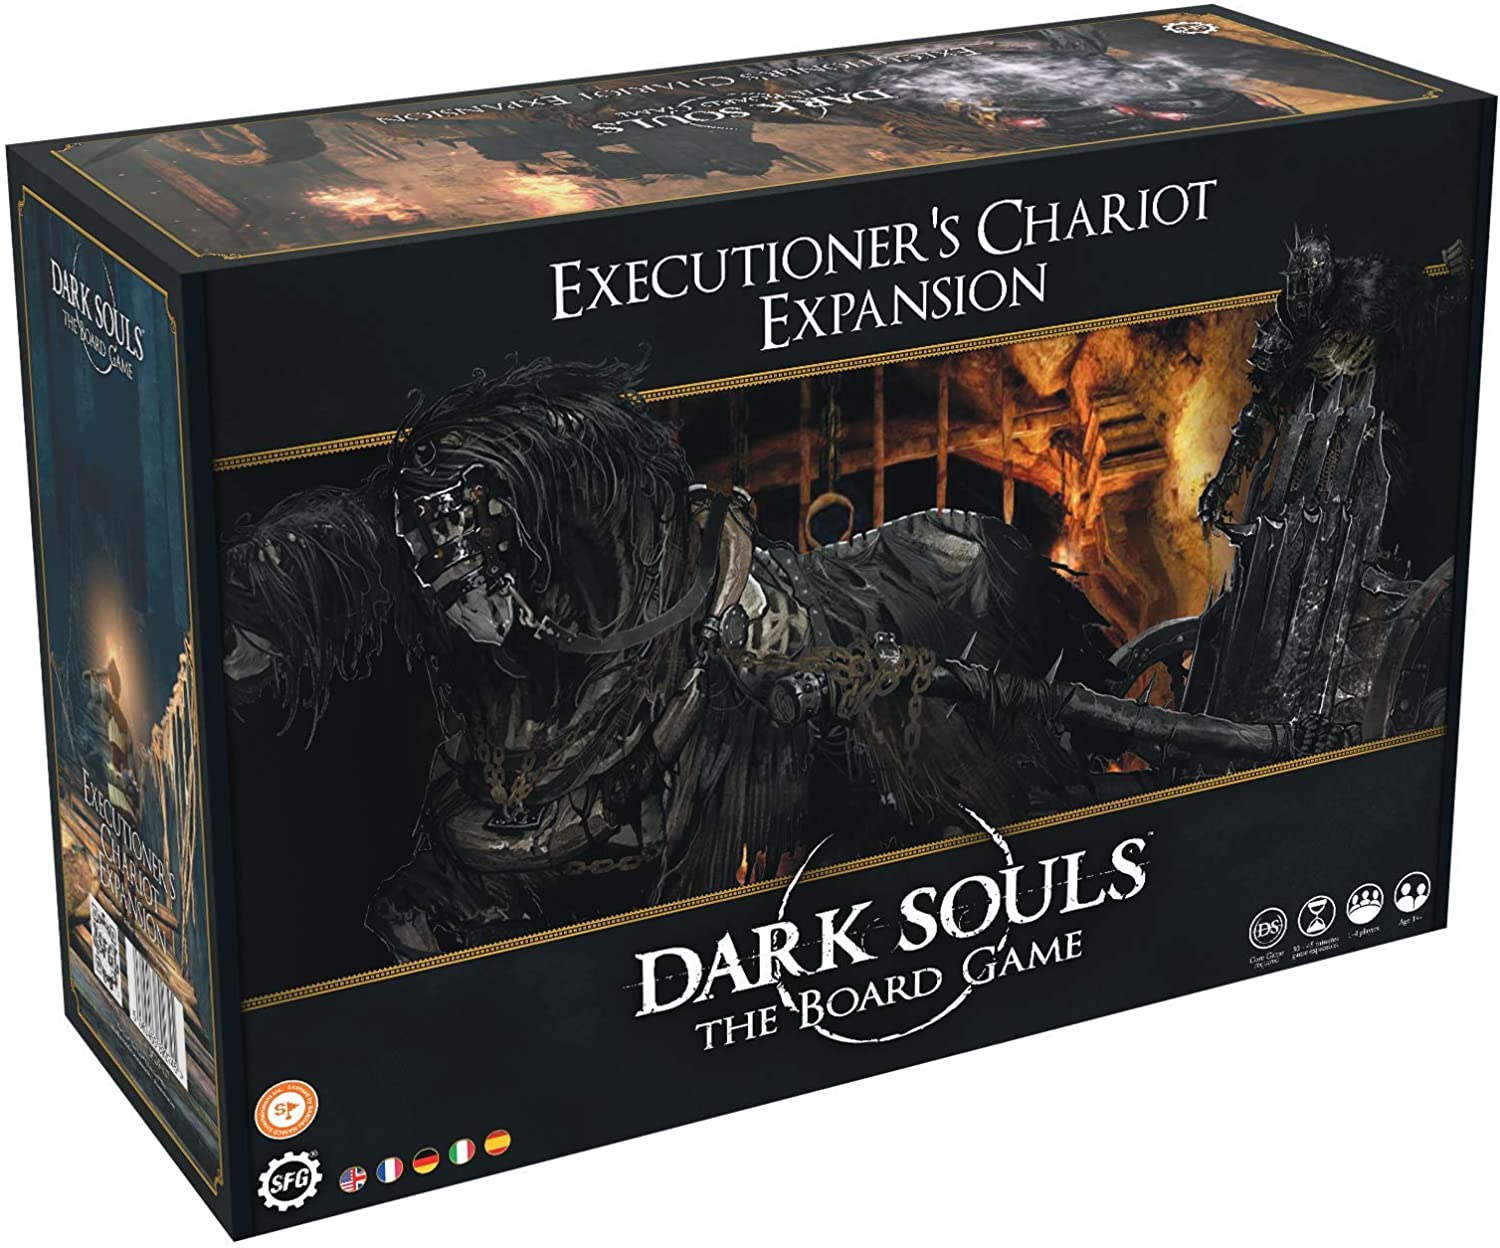 Dark Souls the board game Executioners Chariot Expansion.